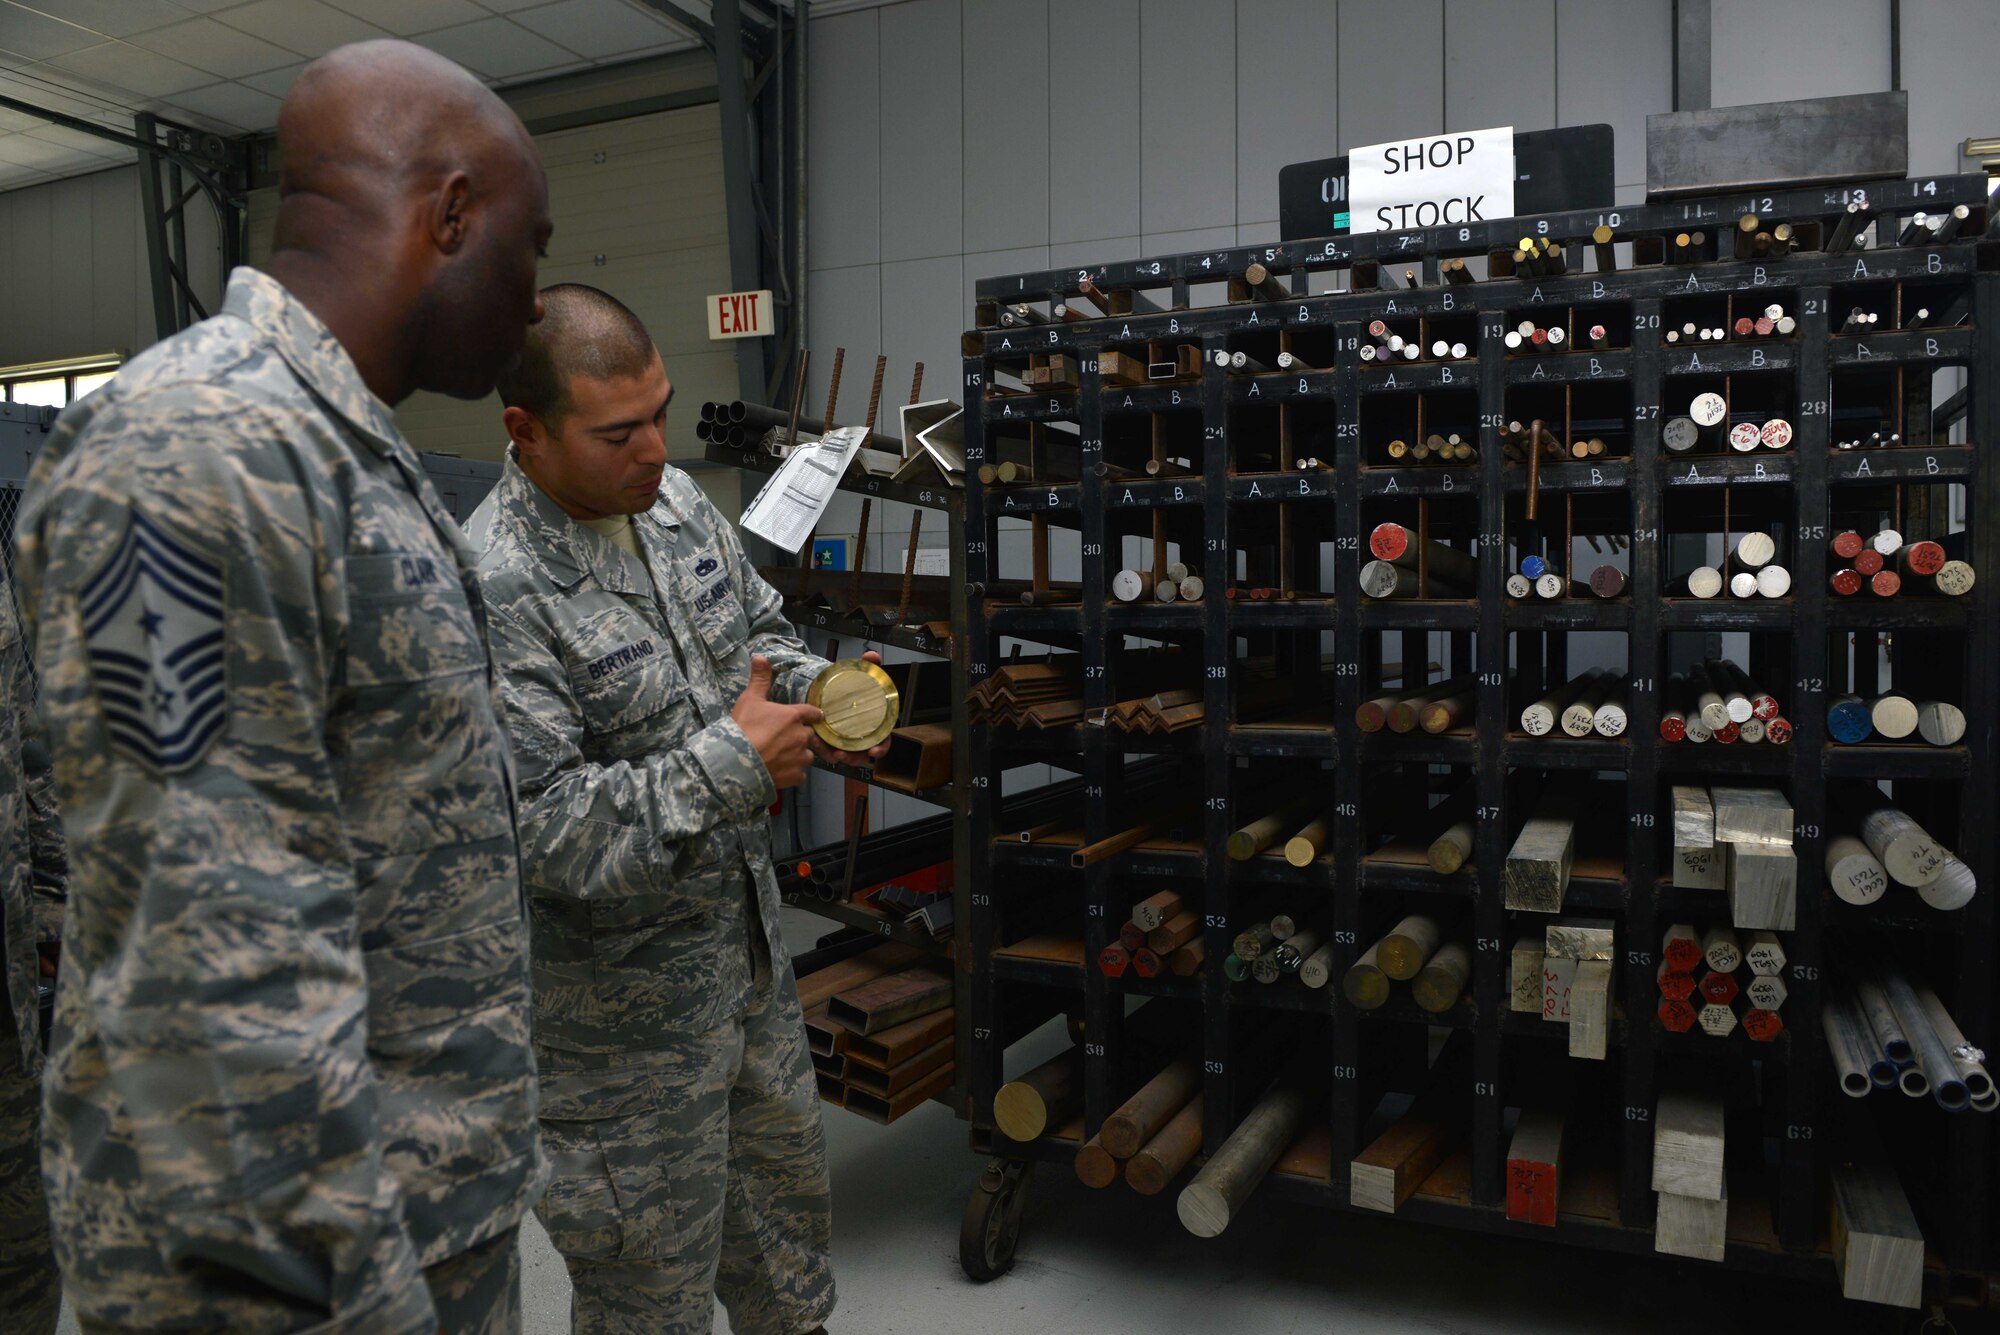 U.S. Air Force Staff Sgt. Steve Bertrand, 39th Maintenance Squadron metals technology craftsman, explains different types of materials to U.S. Air Force Chief Master Sgt. Vegas Clark, 39th Air Base Wing command chief, June 22, 2016, at Incirlik Air Base, Turkey. The rack contains authorized material used for fabrication and repair. (U.S. Air Force photo by Senior Airman John Nieves Camacho/Released)